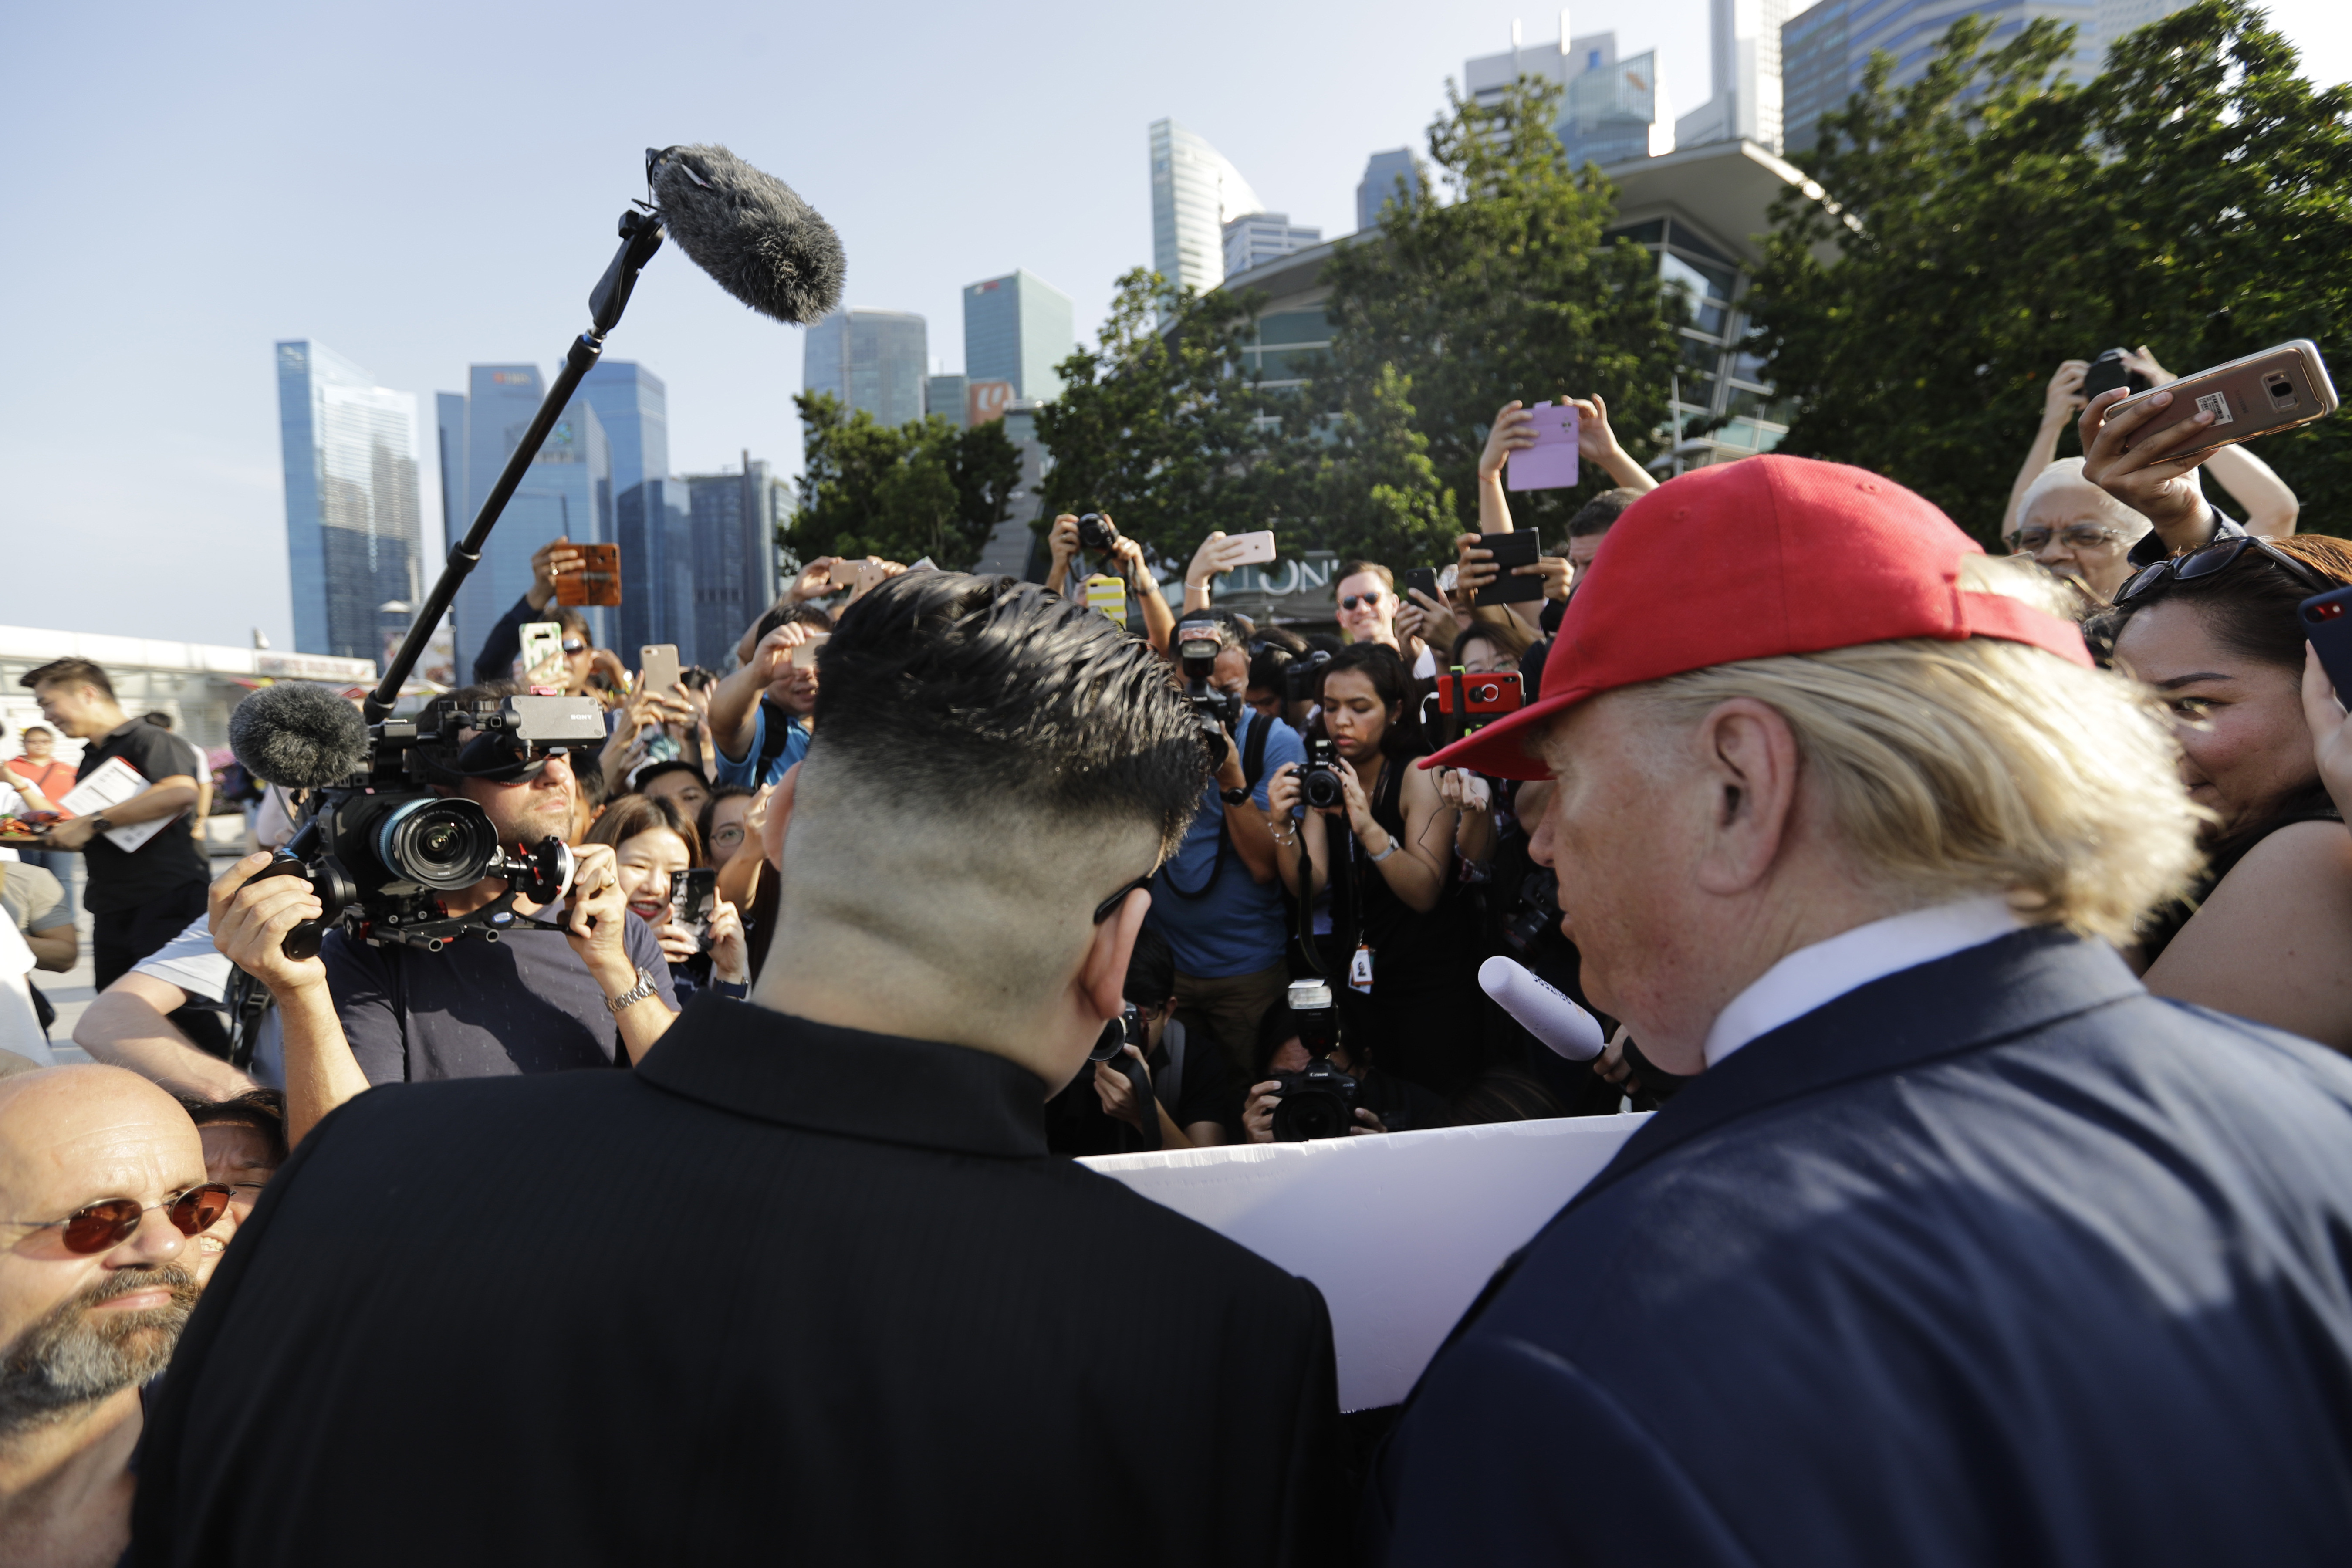 In this June 8, 2018, photo, Kim Jong Un and Donald Trump impersonators, are swamped by members of the media and curious onlookers as they visited the Merlion Park, a popular tourist destination in Singapore. The small island nation of Singapore, which prides itself on law and order, is feeling the pressure of more than 3,000 members of the press arriving for a historic summit between President Donald Trump and North Korean leader Kim Jong Un. Apart from journalists, authorities also have to contend with Kim and Trump impersonators. (AP Photo/Wong Maye-E)